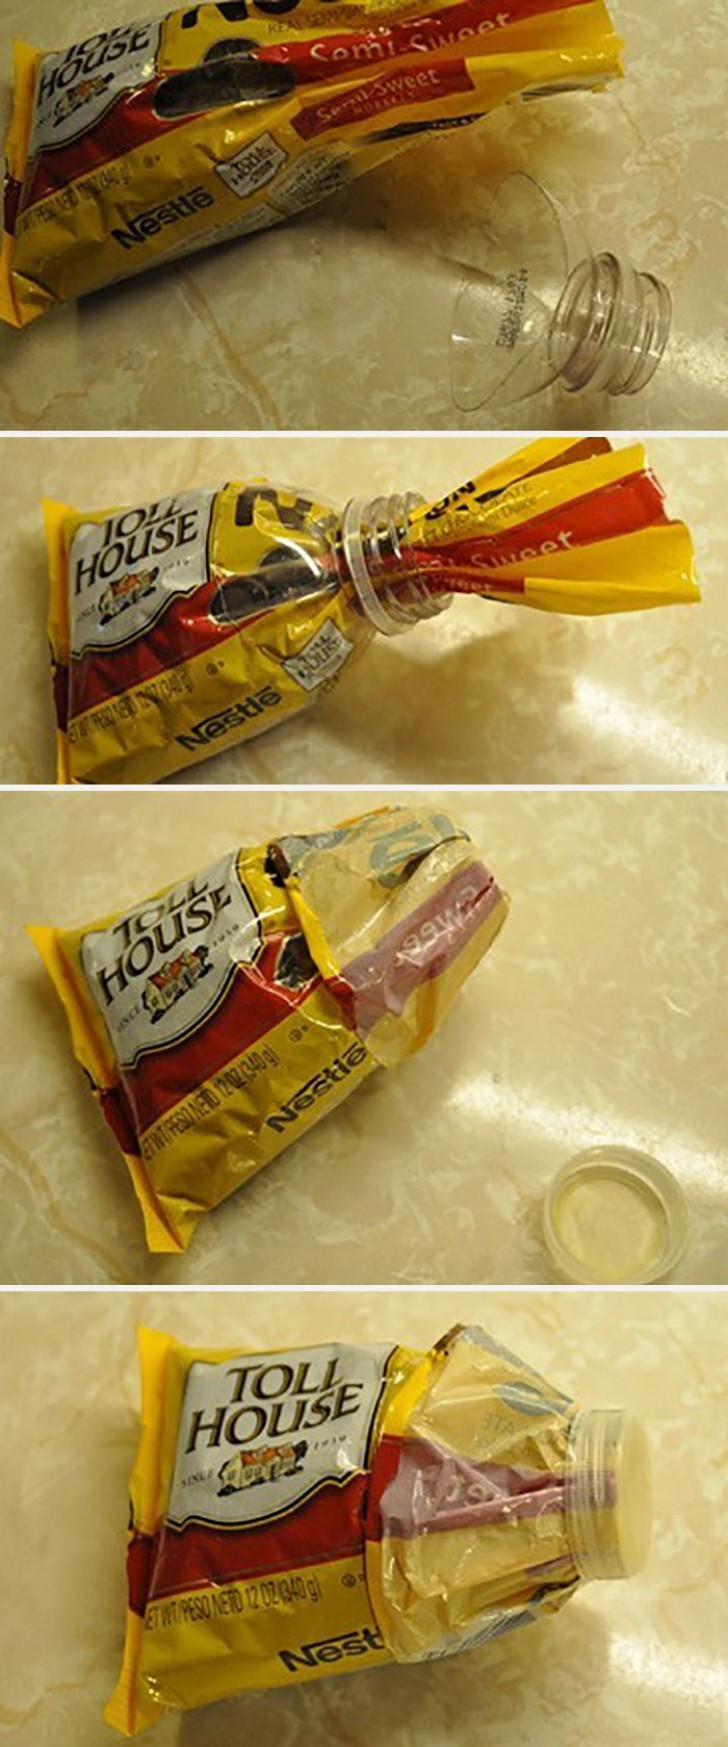 2. Cut the neck off a bottle and use it to seal bags.